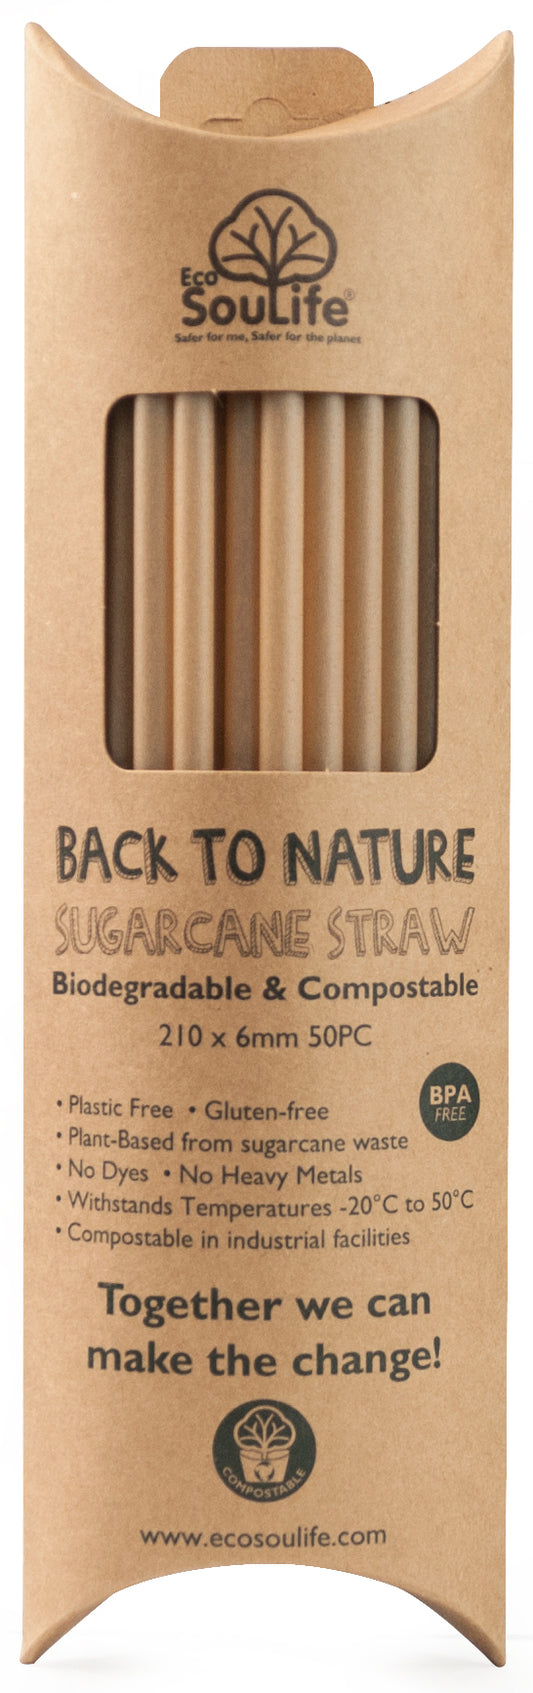 Eco SouLife Back to Nature Sugar Cane Straw 50pc